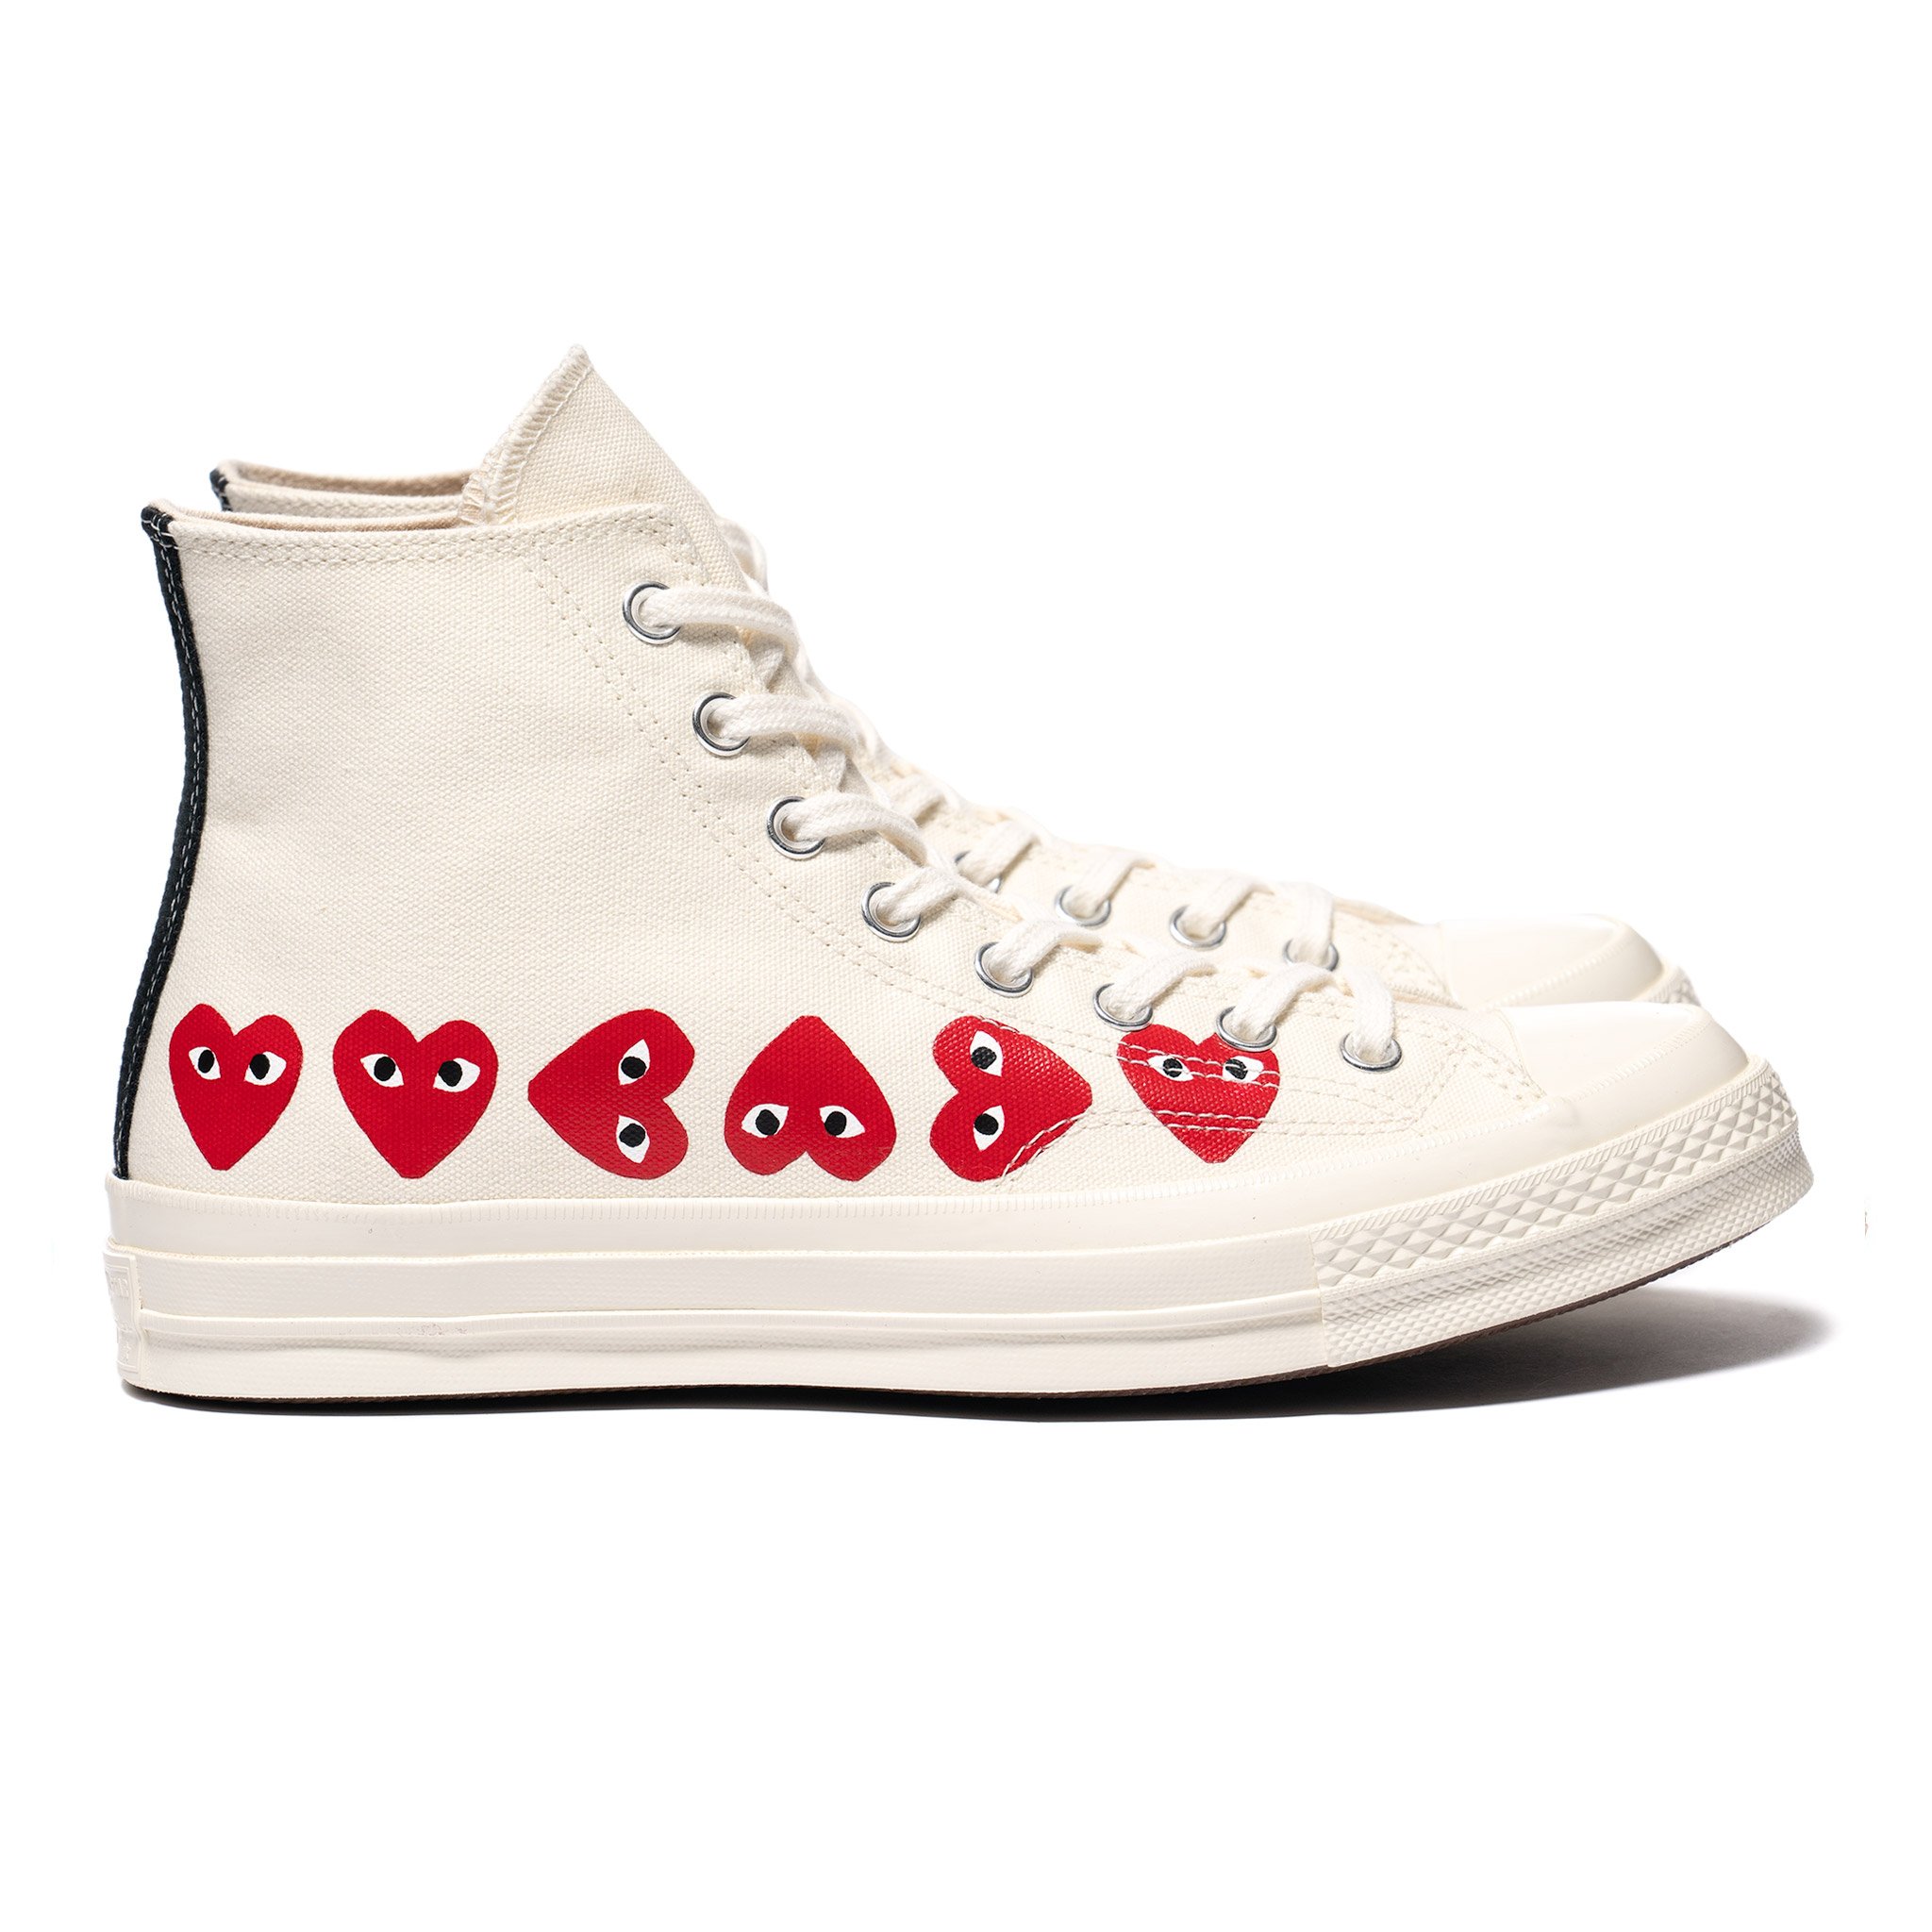 converse with hearts - westendwell.ca